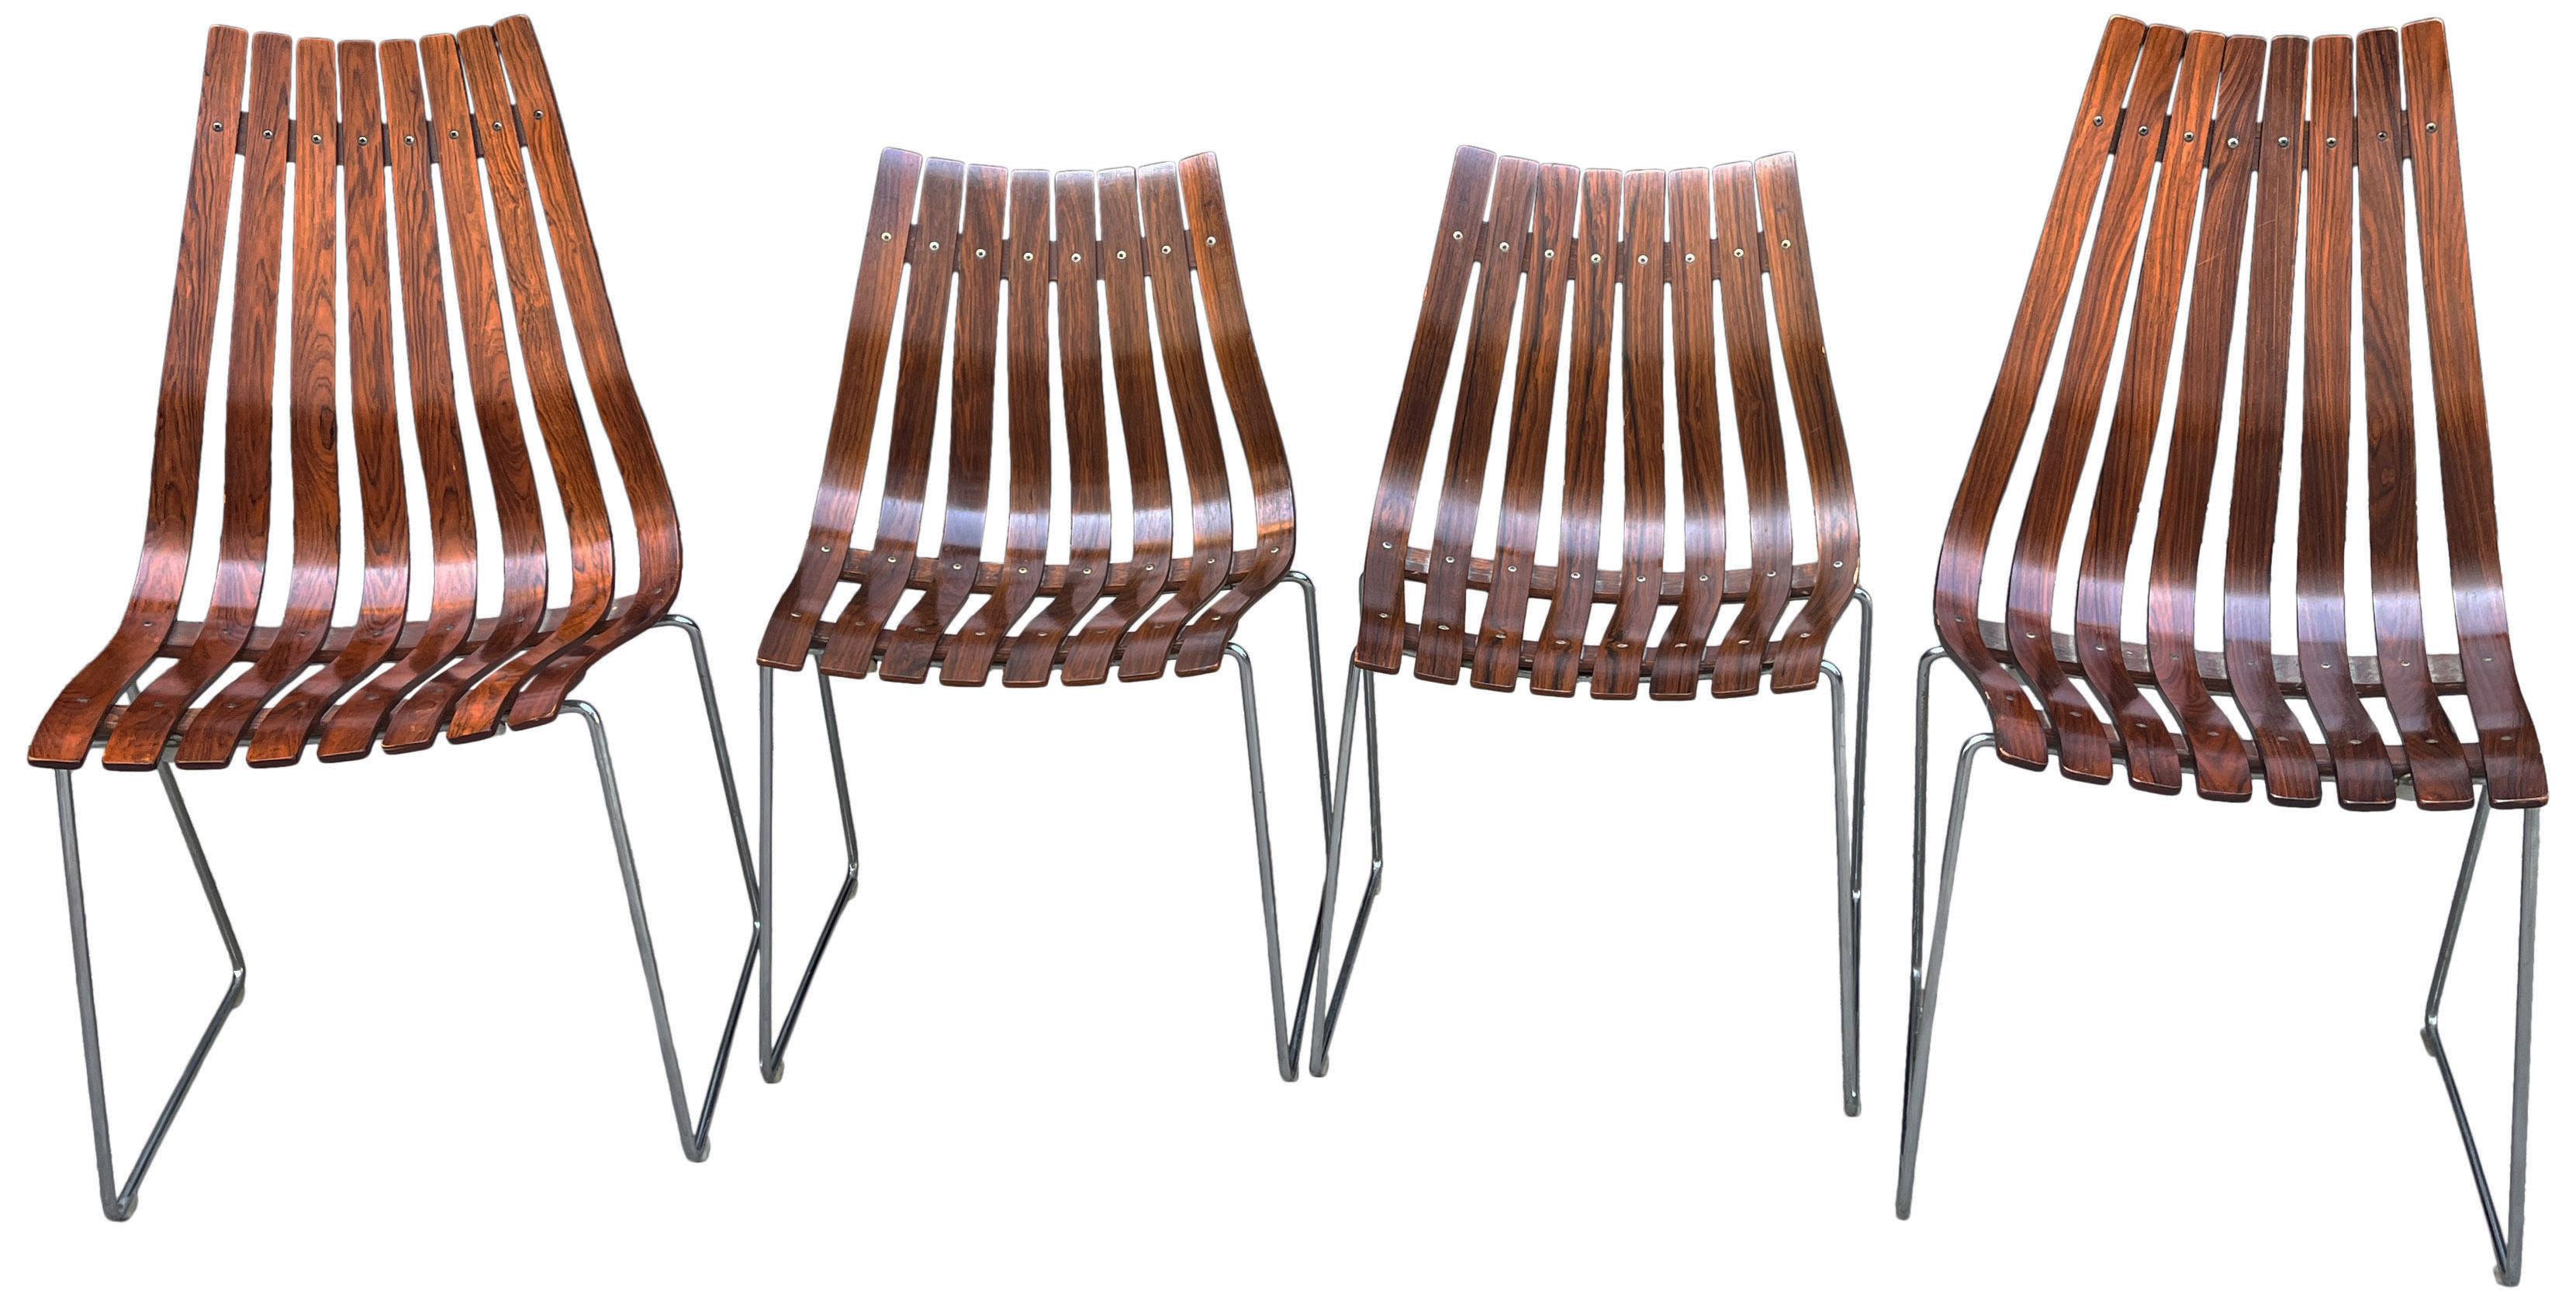 Midcentury Scandia Chairs by Hans Brattrud for Hove Mobler In Good Condition For Sale In BROOKLYN, NY